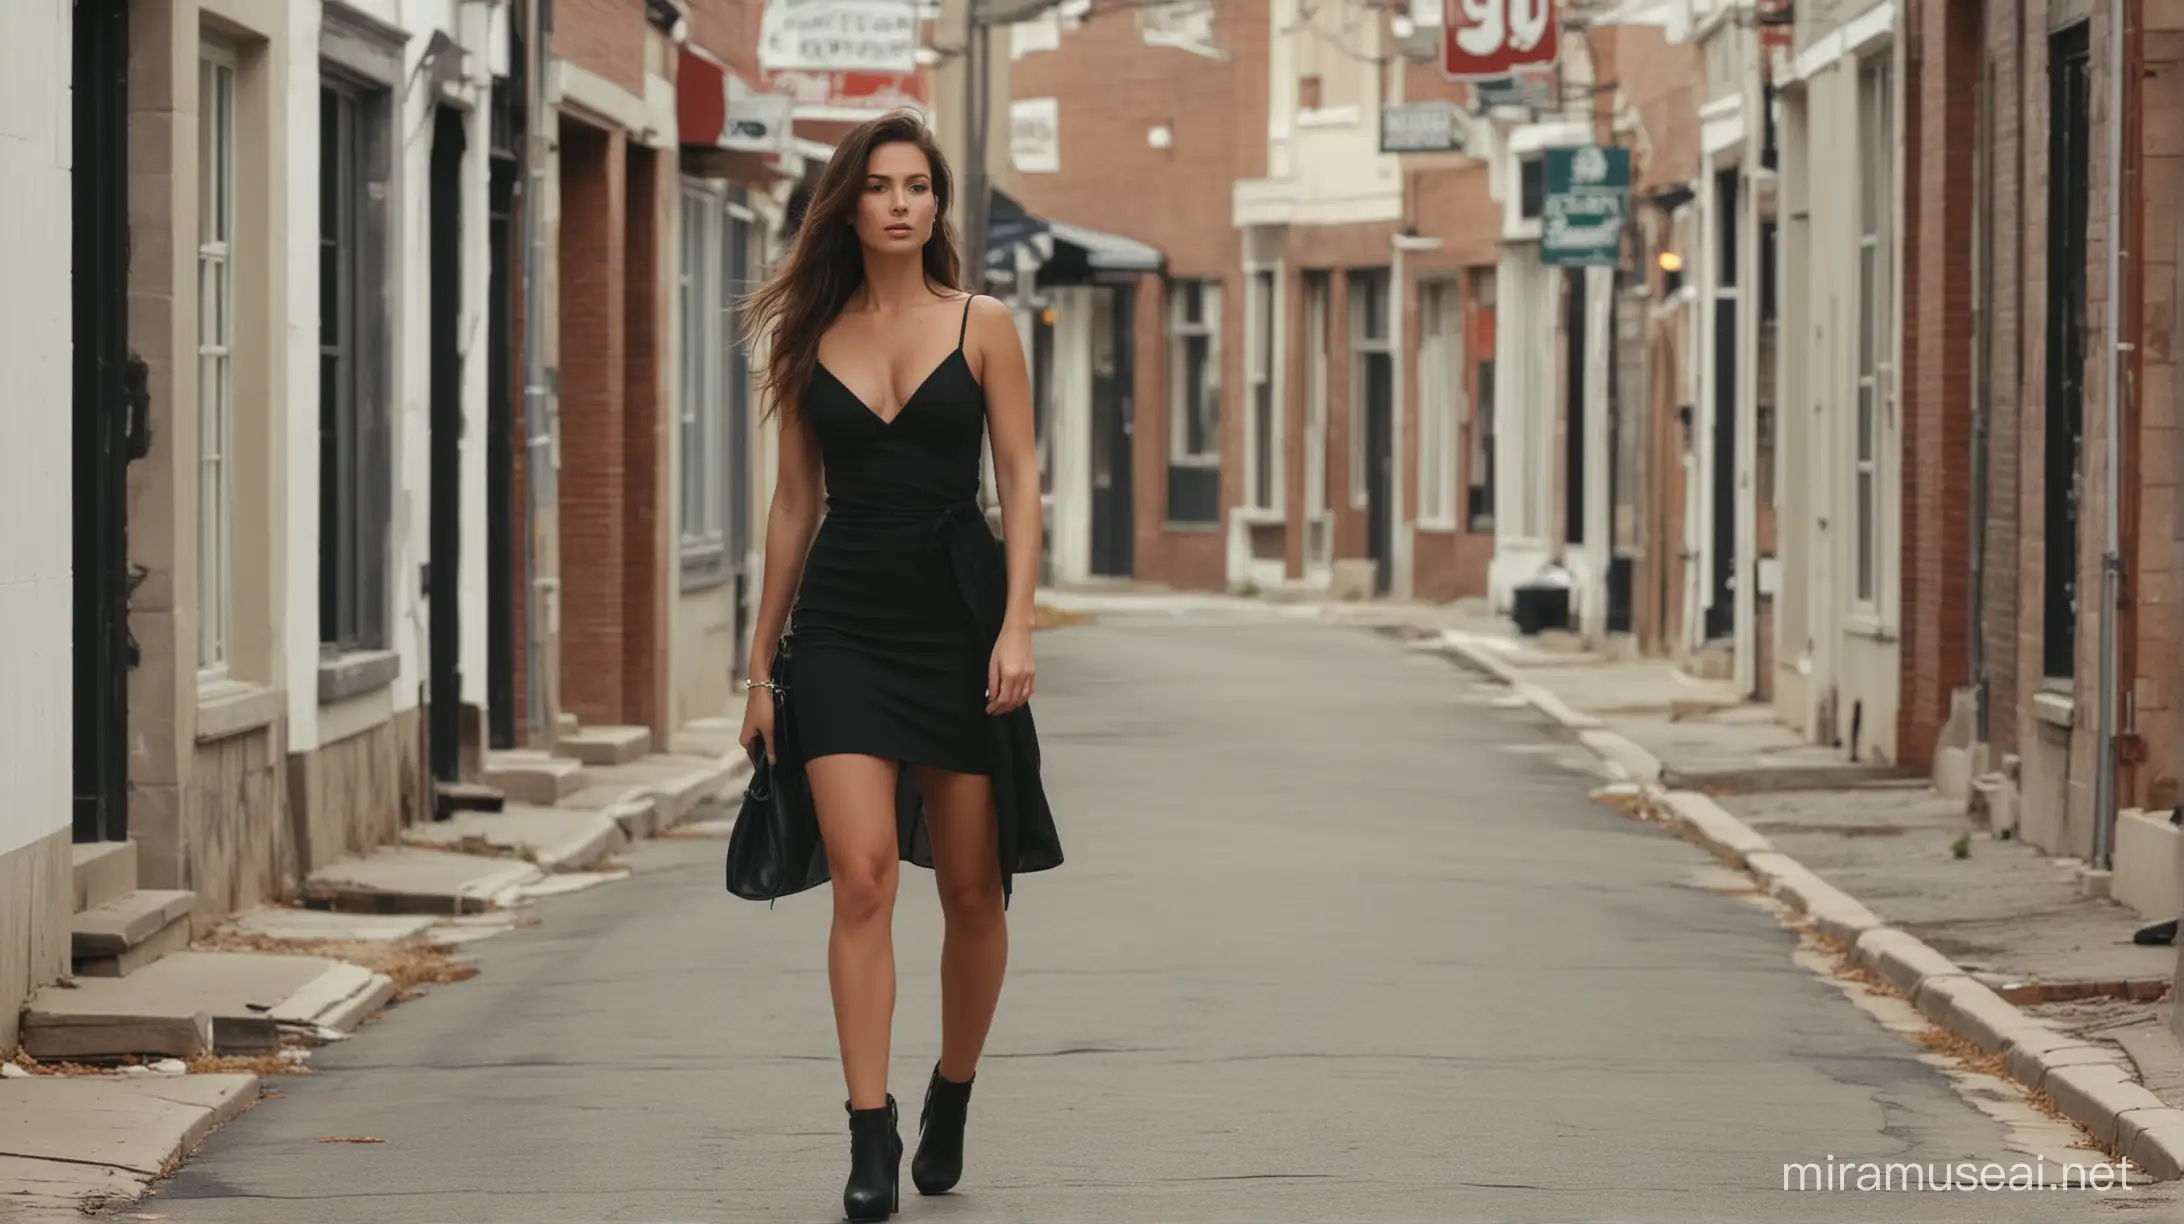 Seductive Woman Strides Through Abandoned Small Town Street